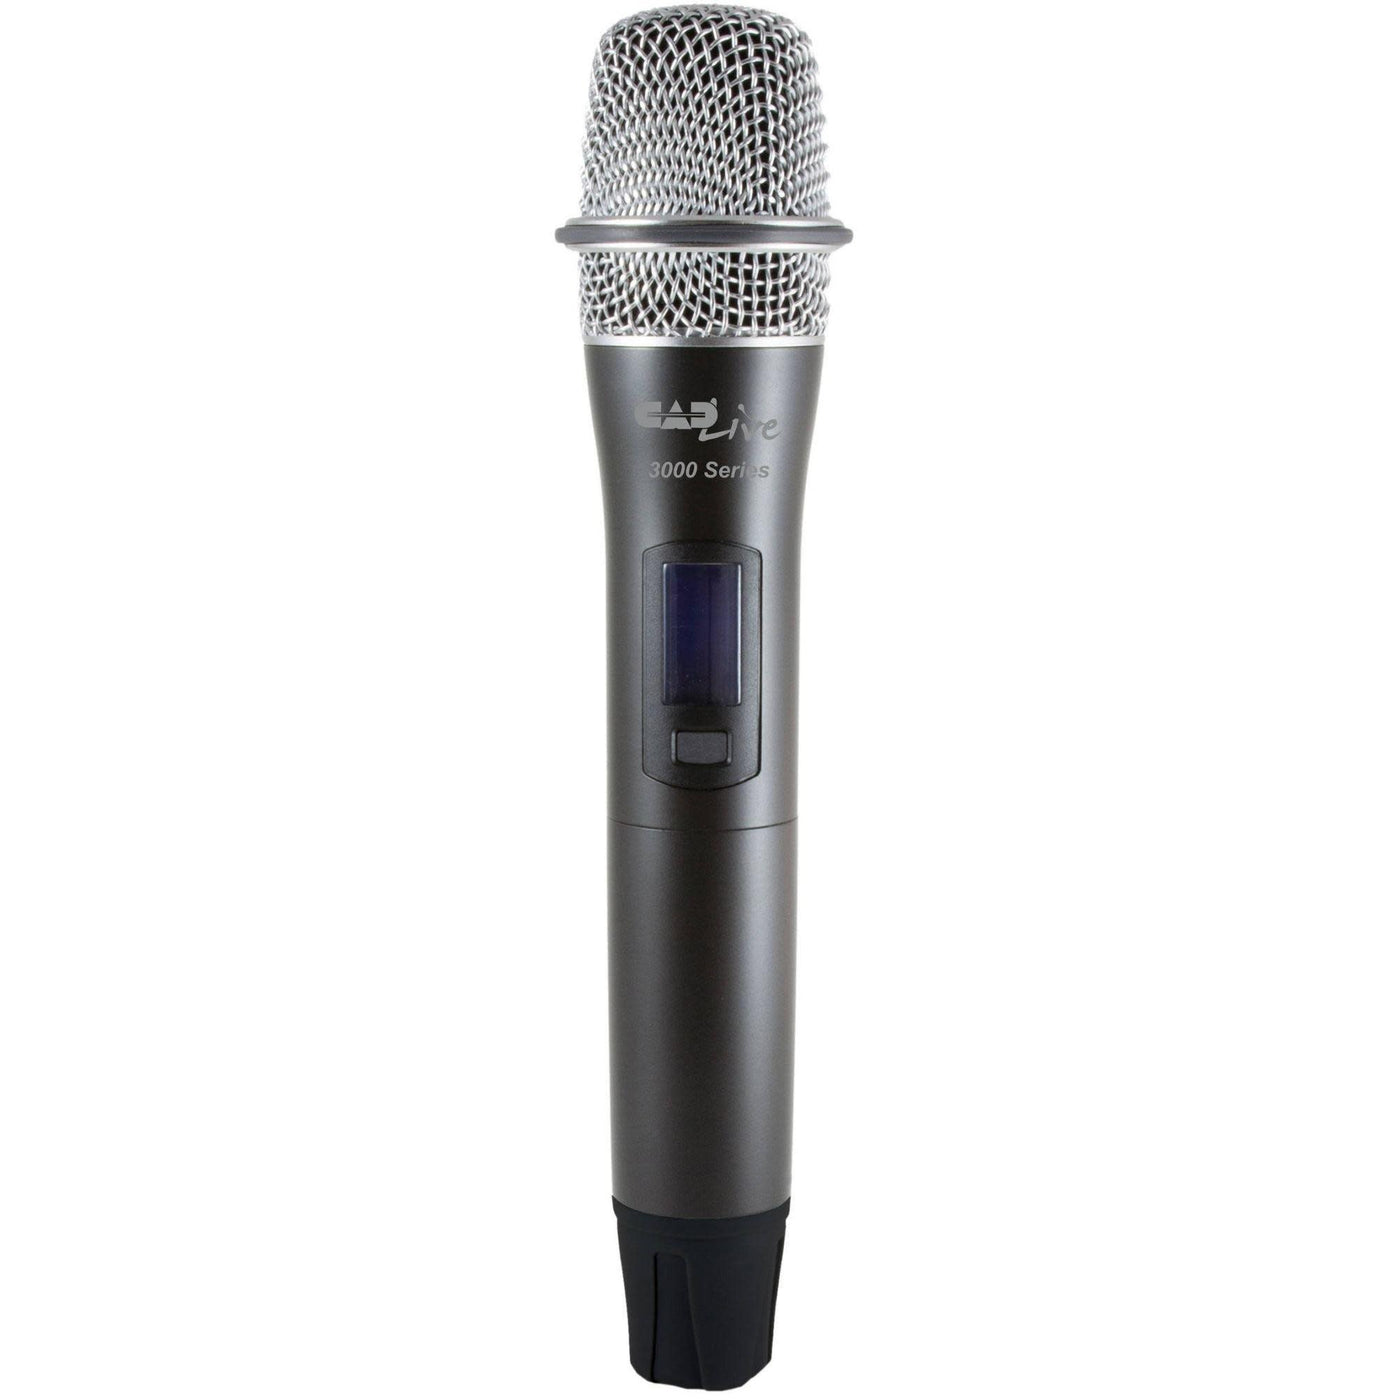 CAD Audio TX3000 Dynamic Handheld Microphone for WX3000 Series